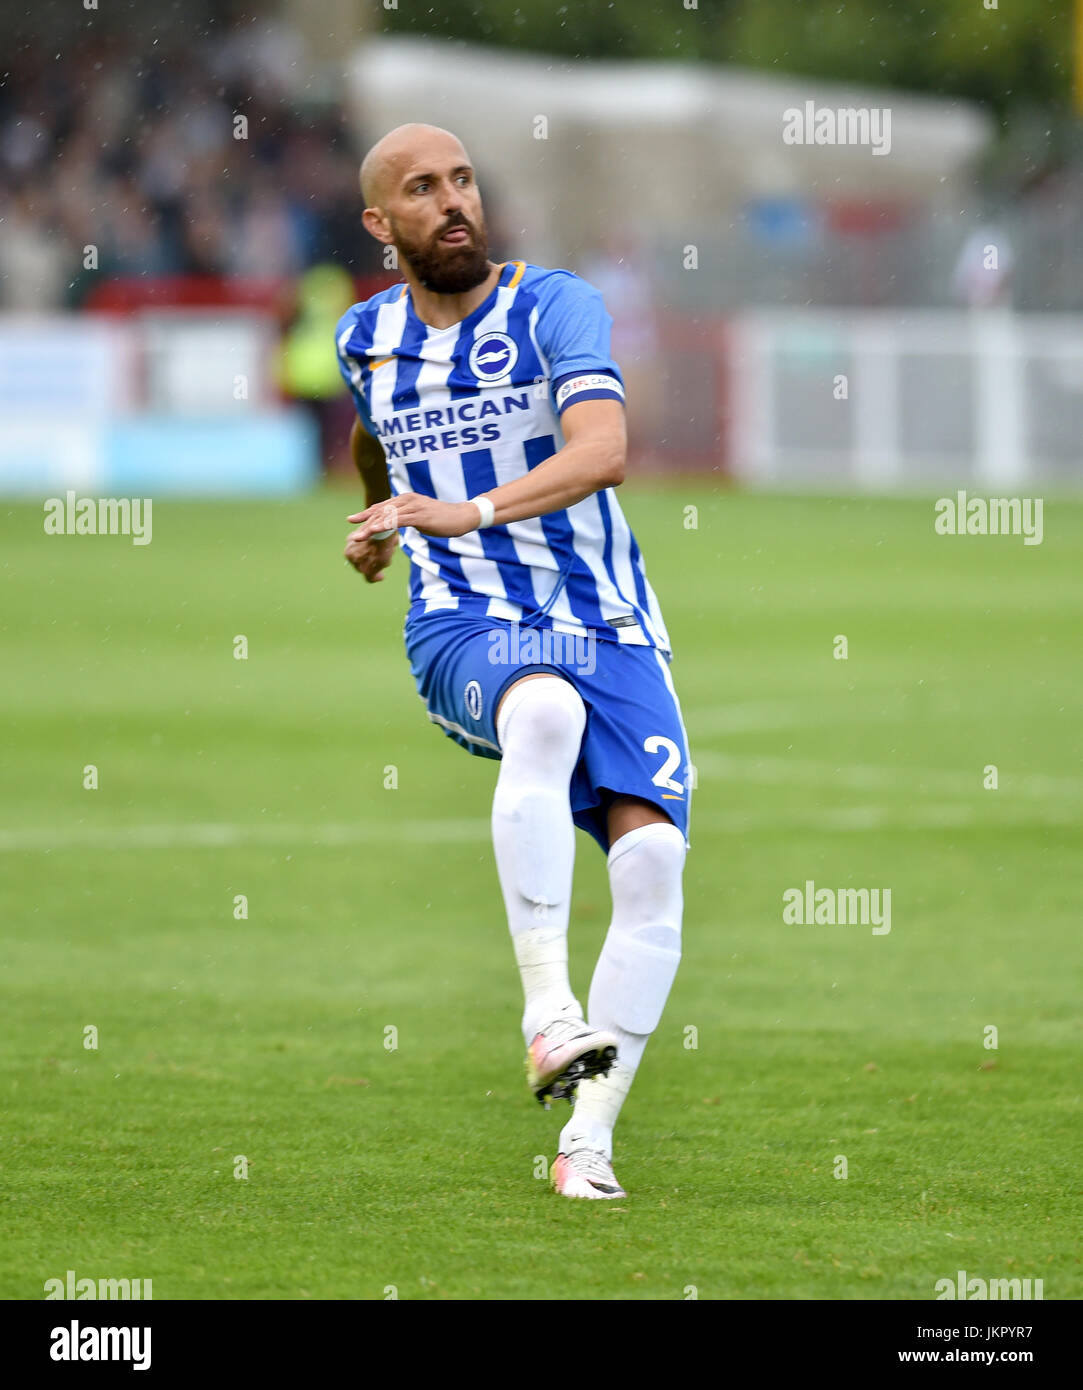 Bruno Saltor of Brighton during the Friendly match between Crawley Town and Brighton and Hove Albion at the Checkatrade Stadium in Crawley. 22 Jul 2017 - Editorial use only. No merchandising. For Football images FA and Premier League restrictions apply inc. no internet/mobile usage without FAPL license - for details contact Football Dataco Stock Photo